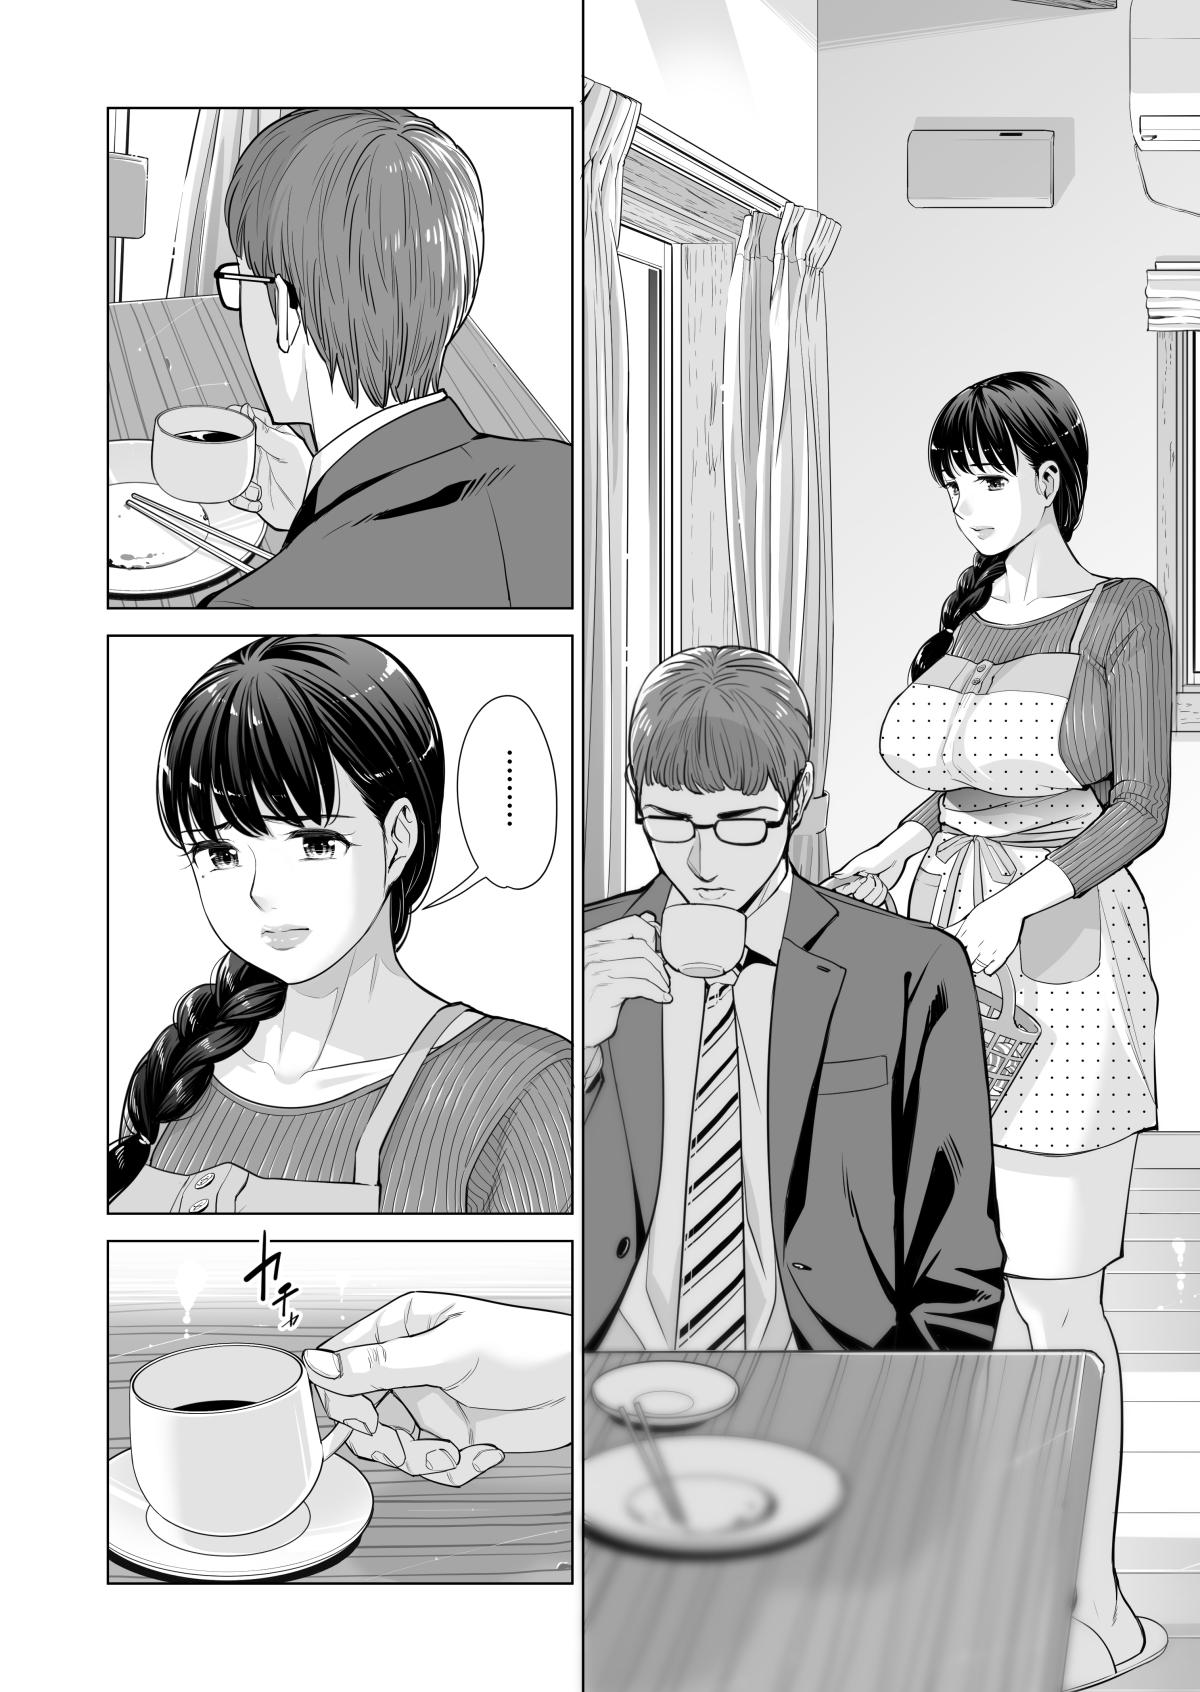 [HGT Lab (Tsusauto)] Tsukiyo no Midare Zake (Kouhen) Moonlit Intoxication ~ A Housewife Stolen by a Coworker Besides her Blackout Drunk Husband ~ Chapter 2 [English] 4